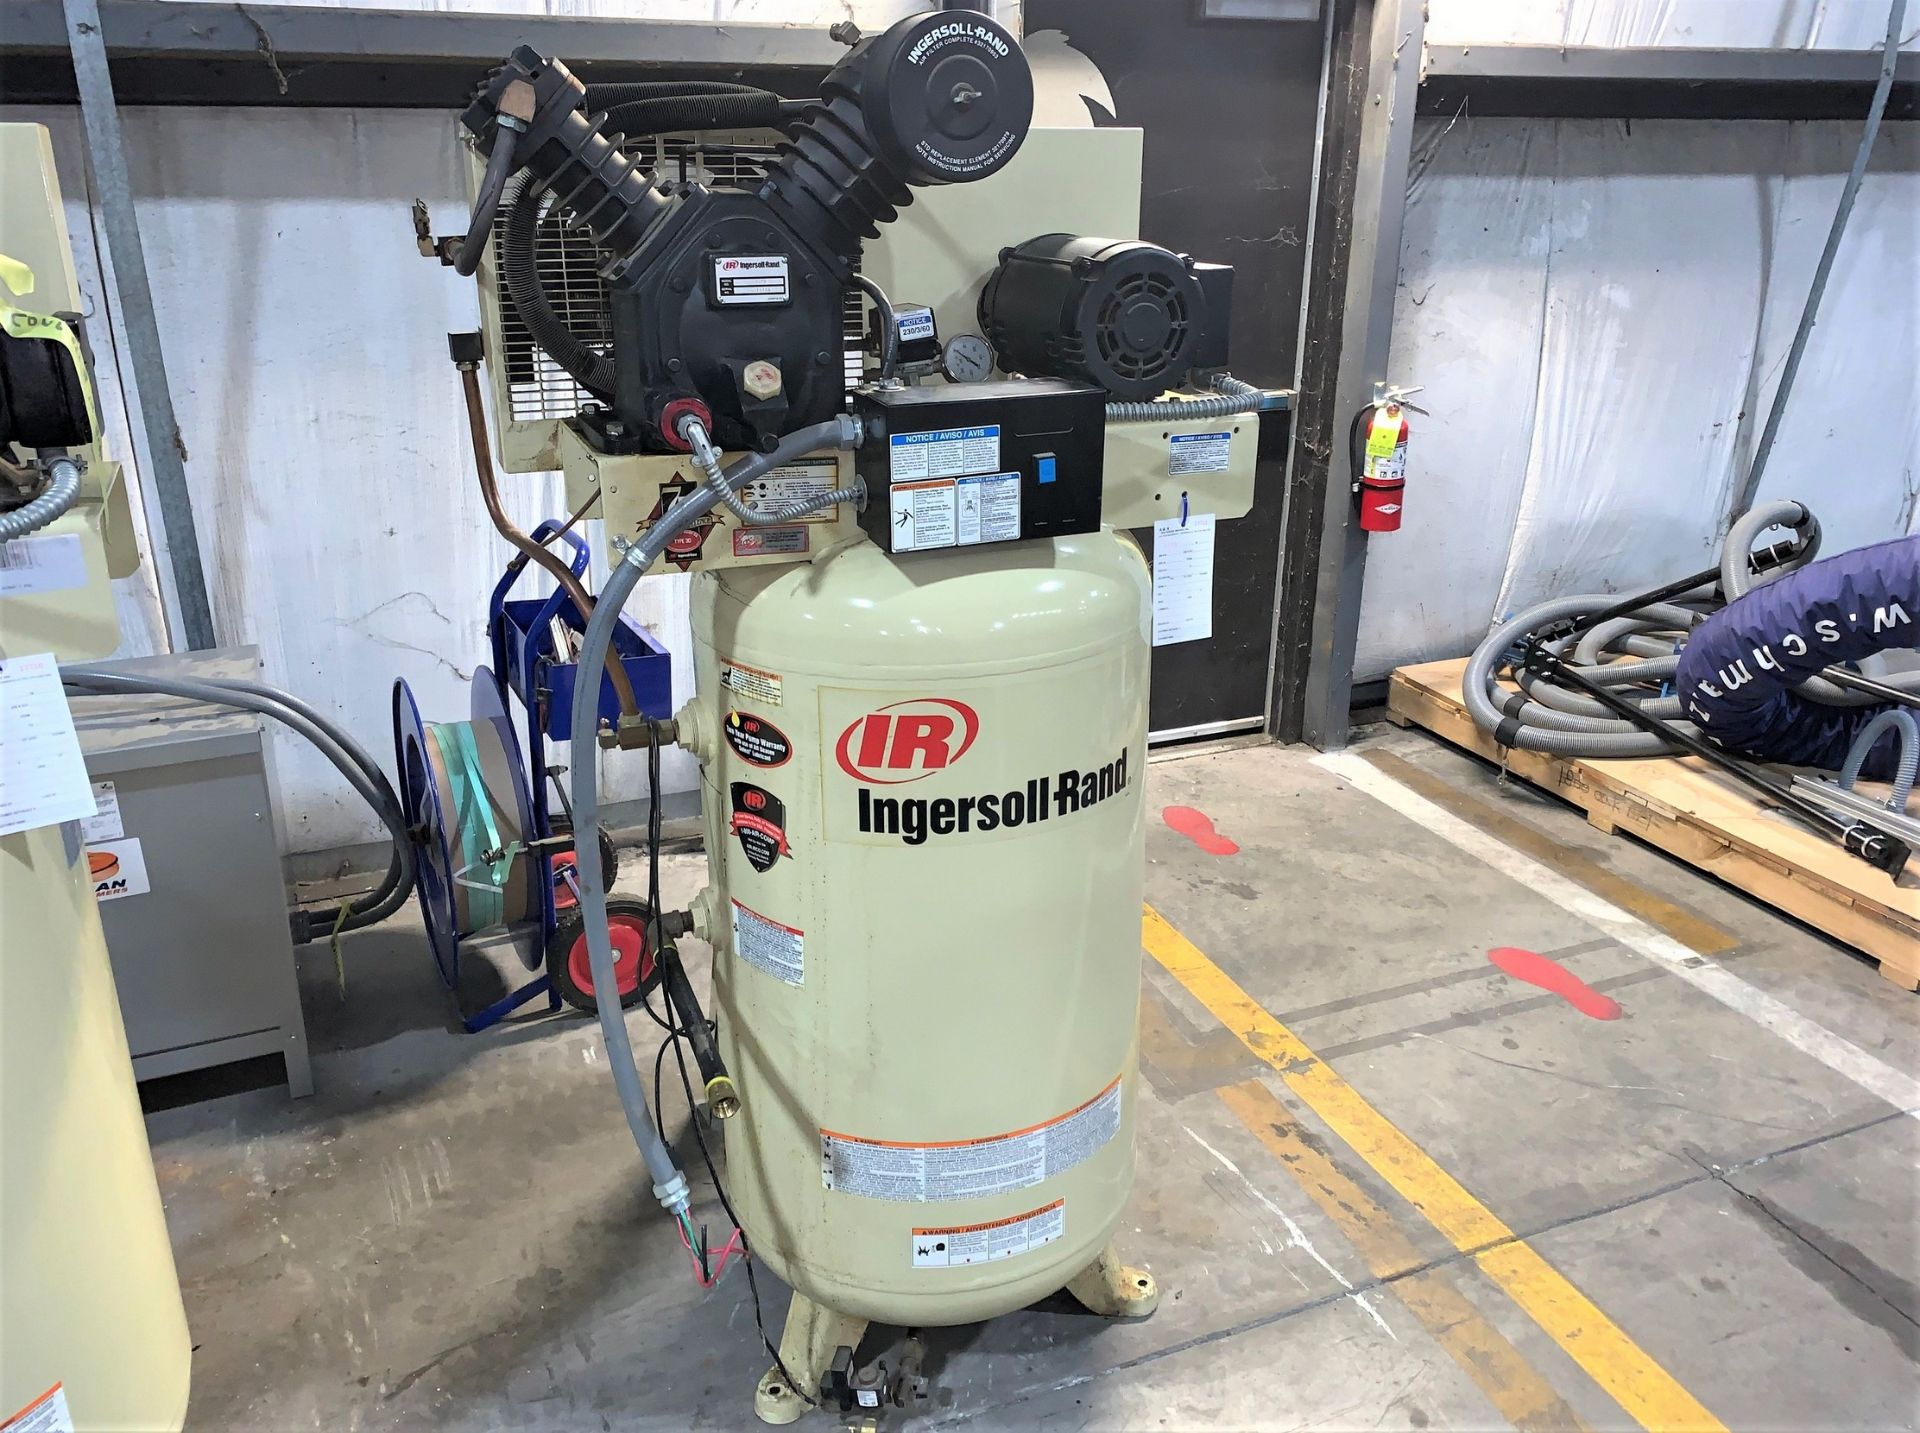 Ingersoll Rand 7.5Hp Reciprocating 2-Stage Air Compressor - Image 2 of 10